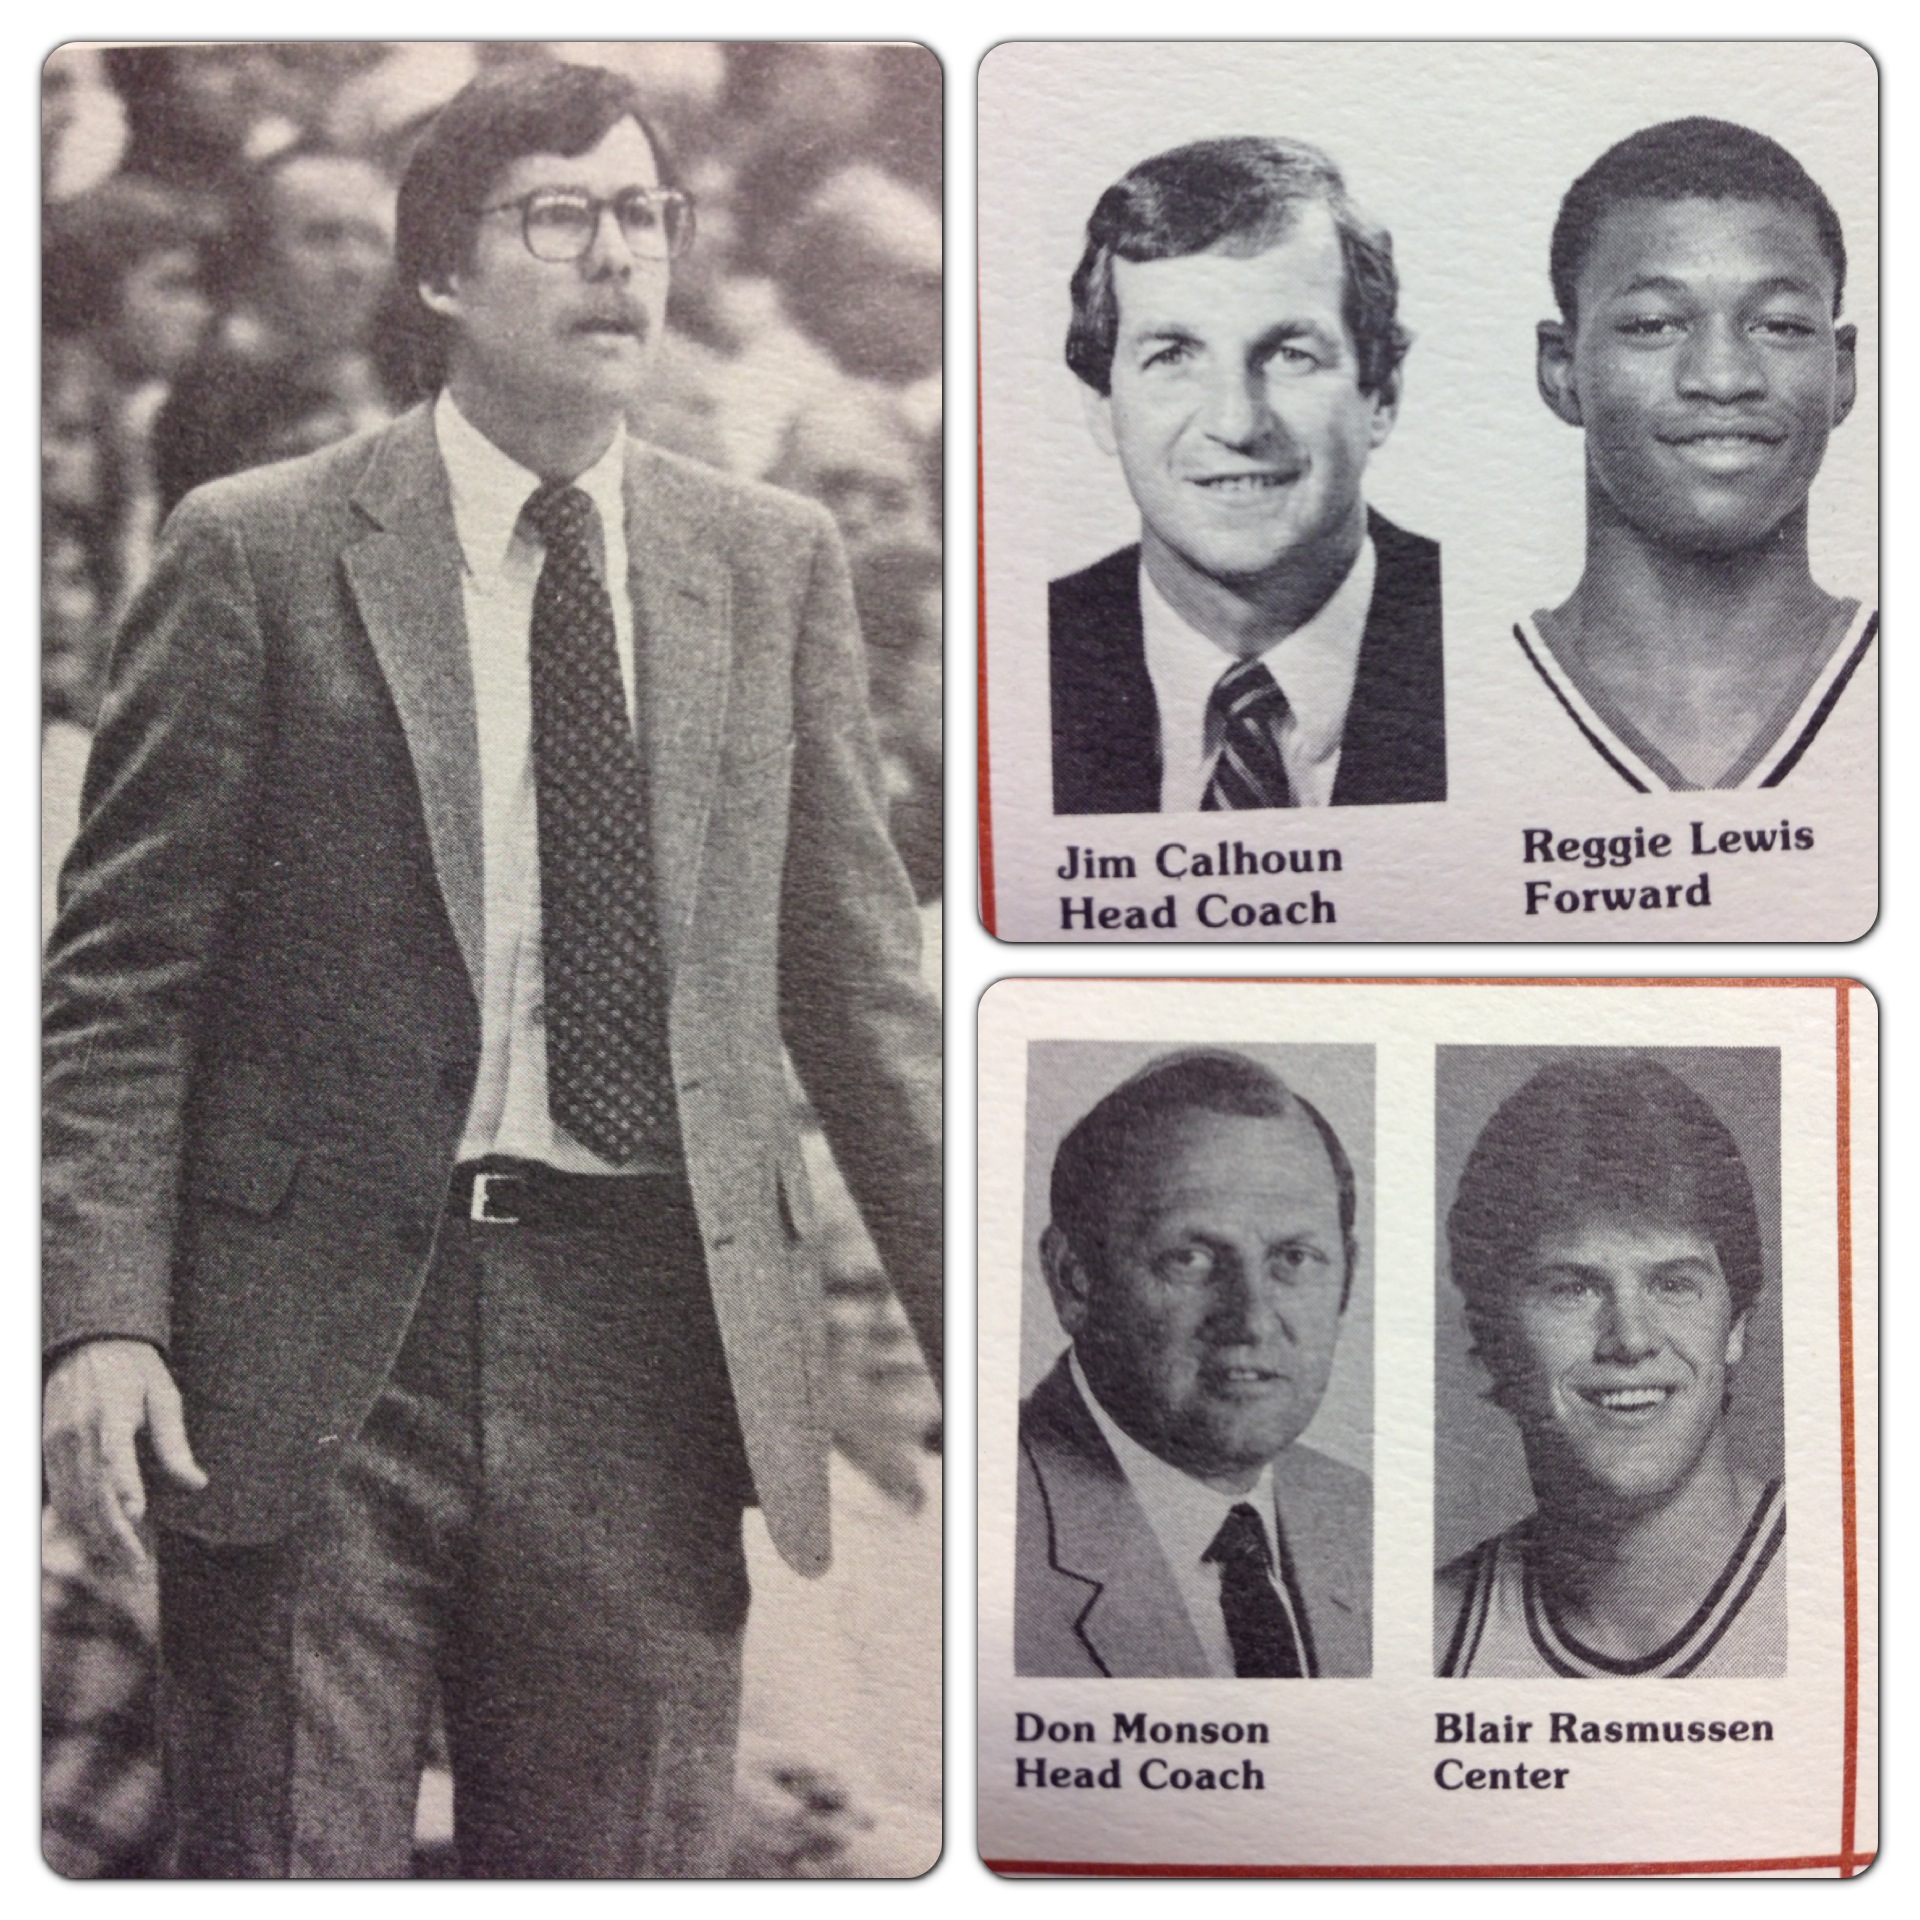 The media guide contained some big deal coaches.